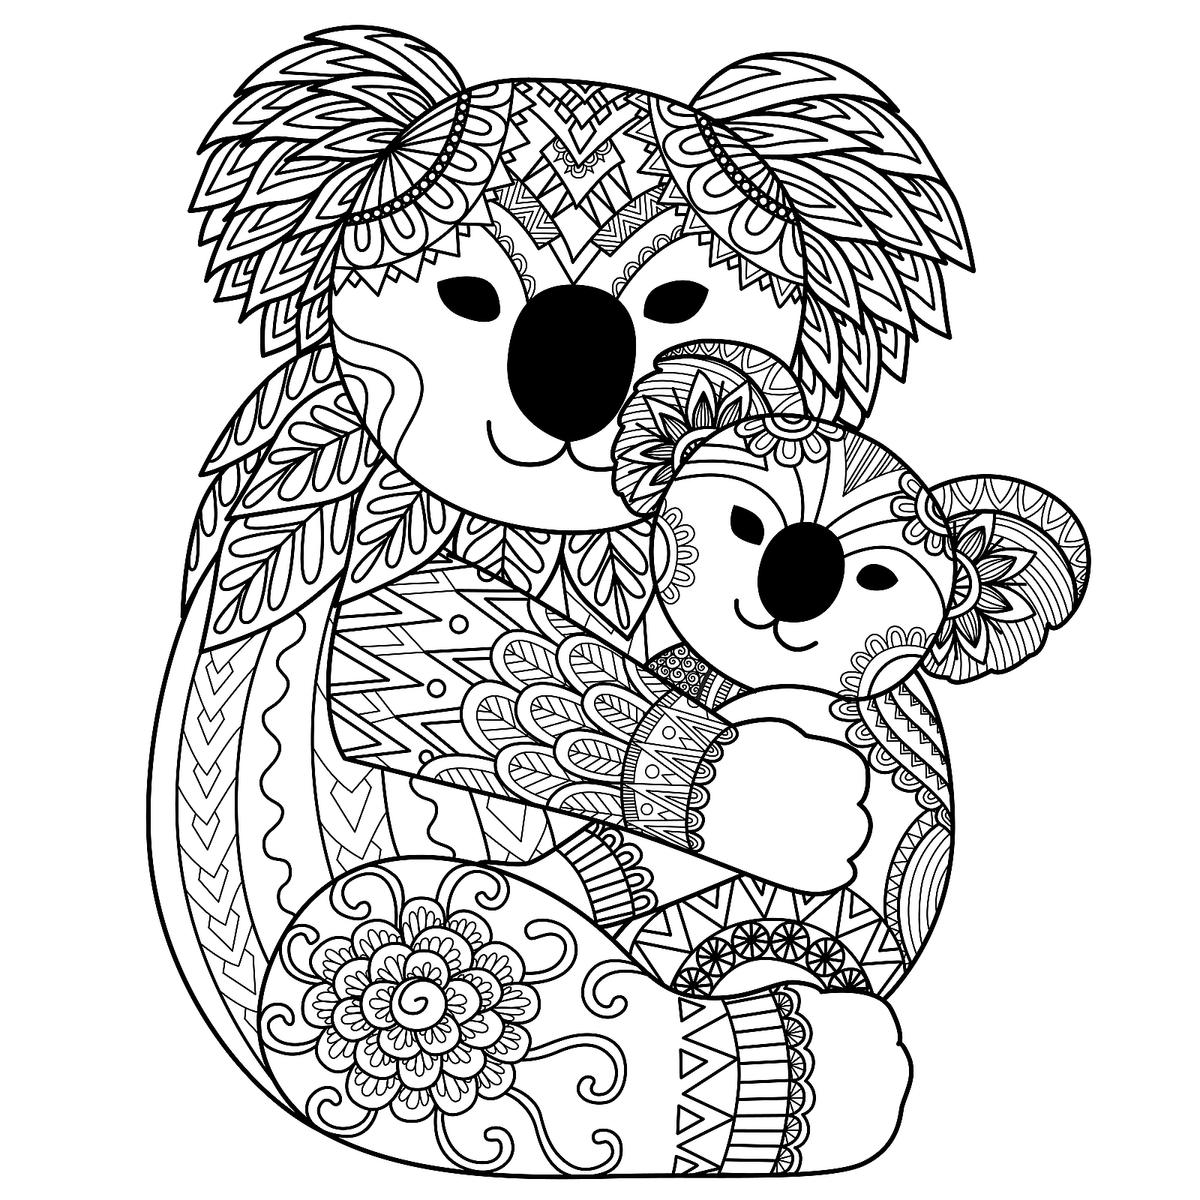 Animal Coloring Pages Adults Kids, Instant Download, Grayscale Coloring,  Printable PDF 